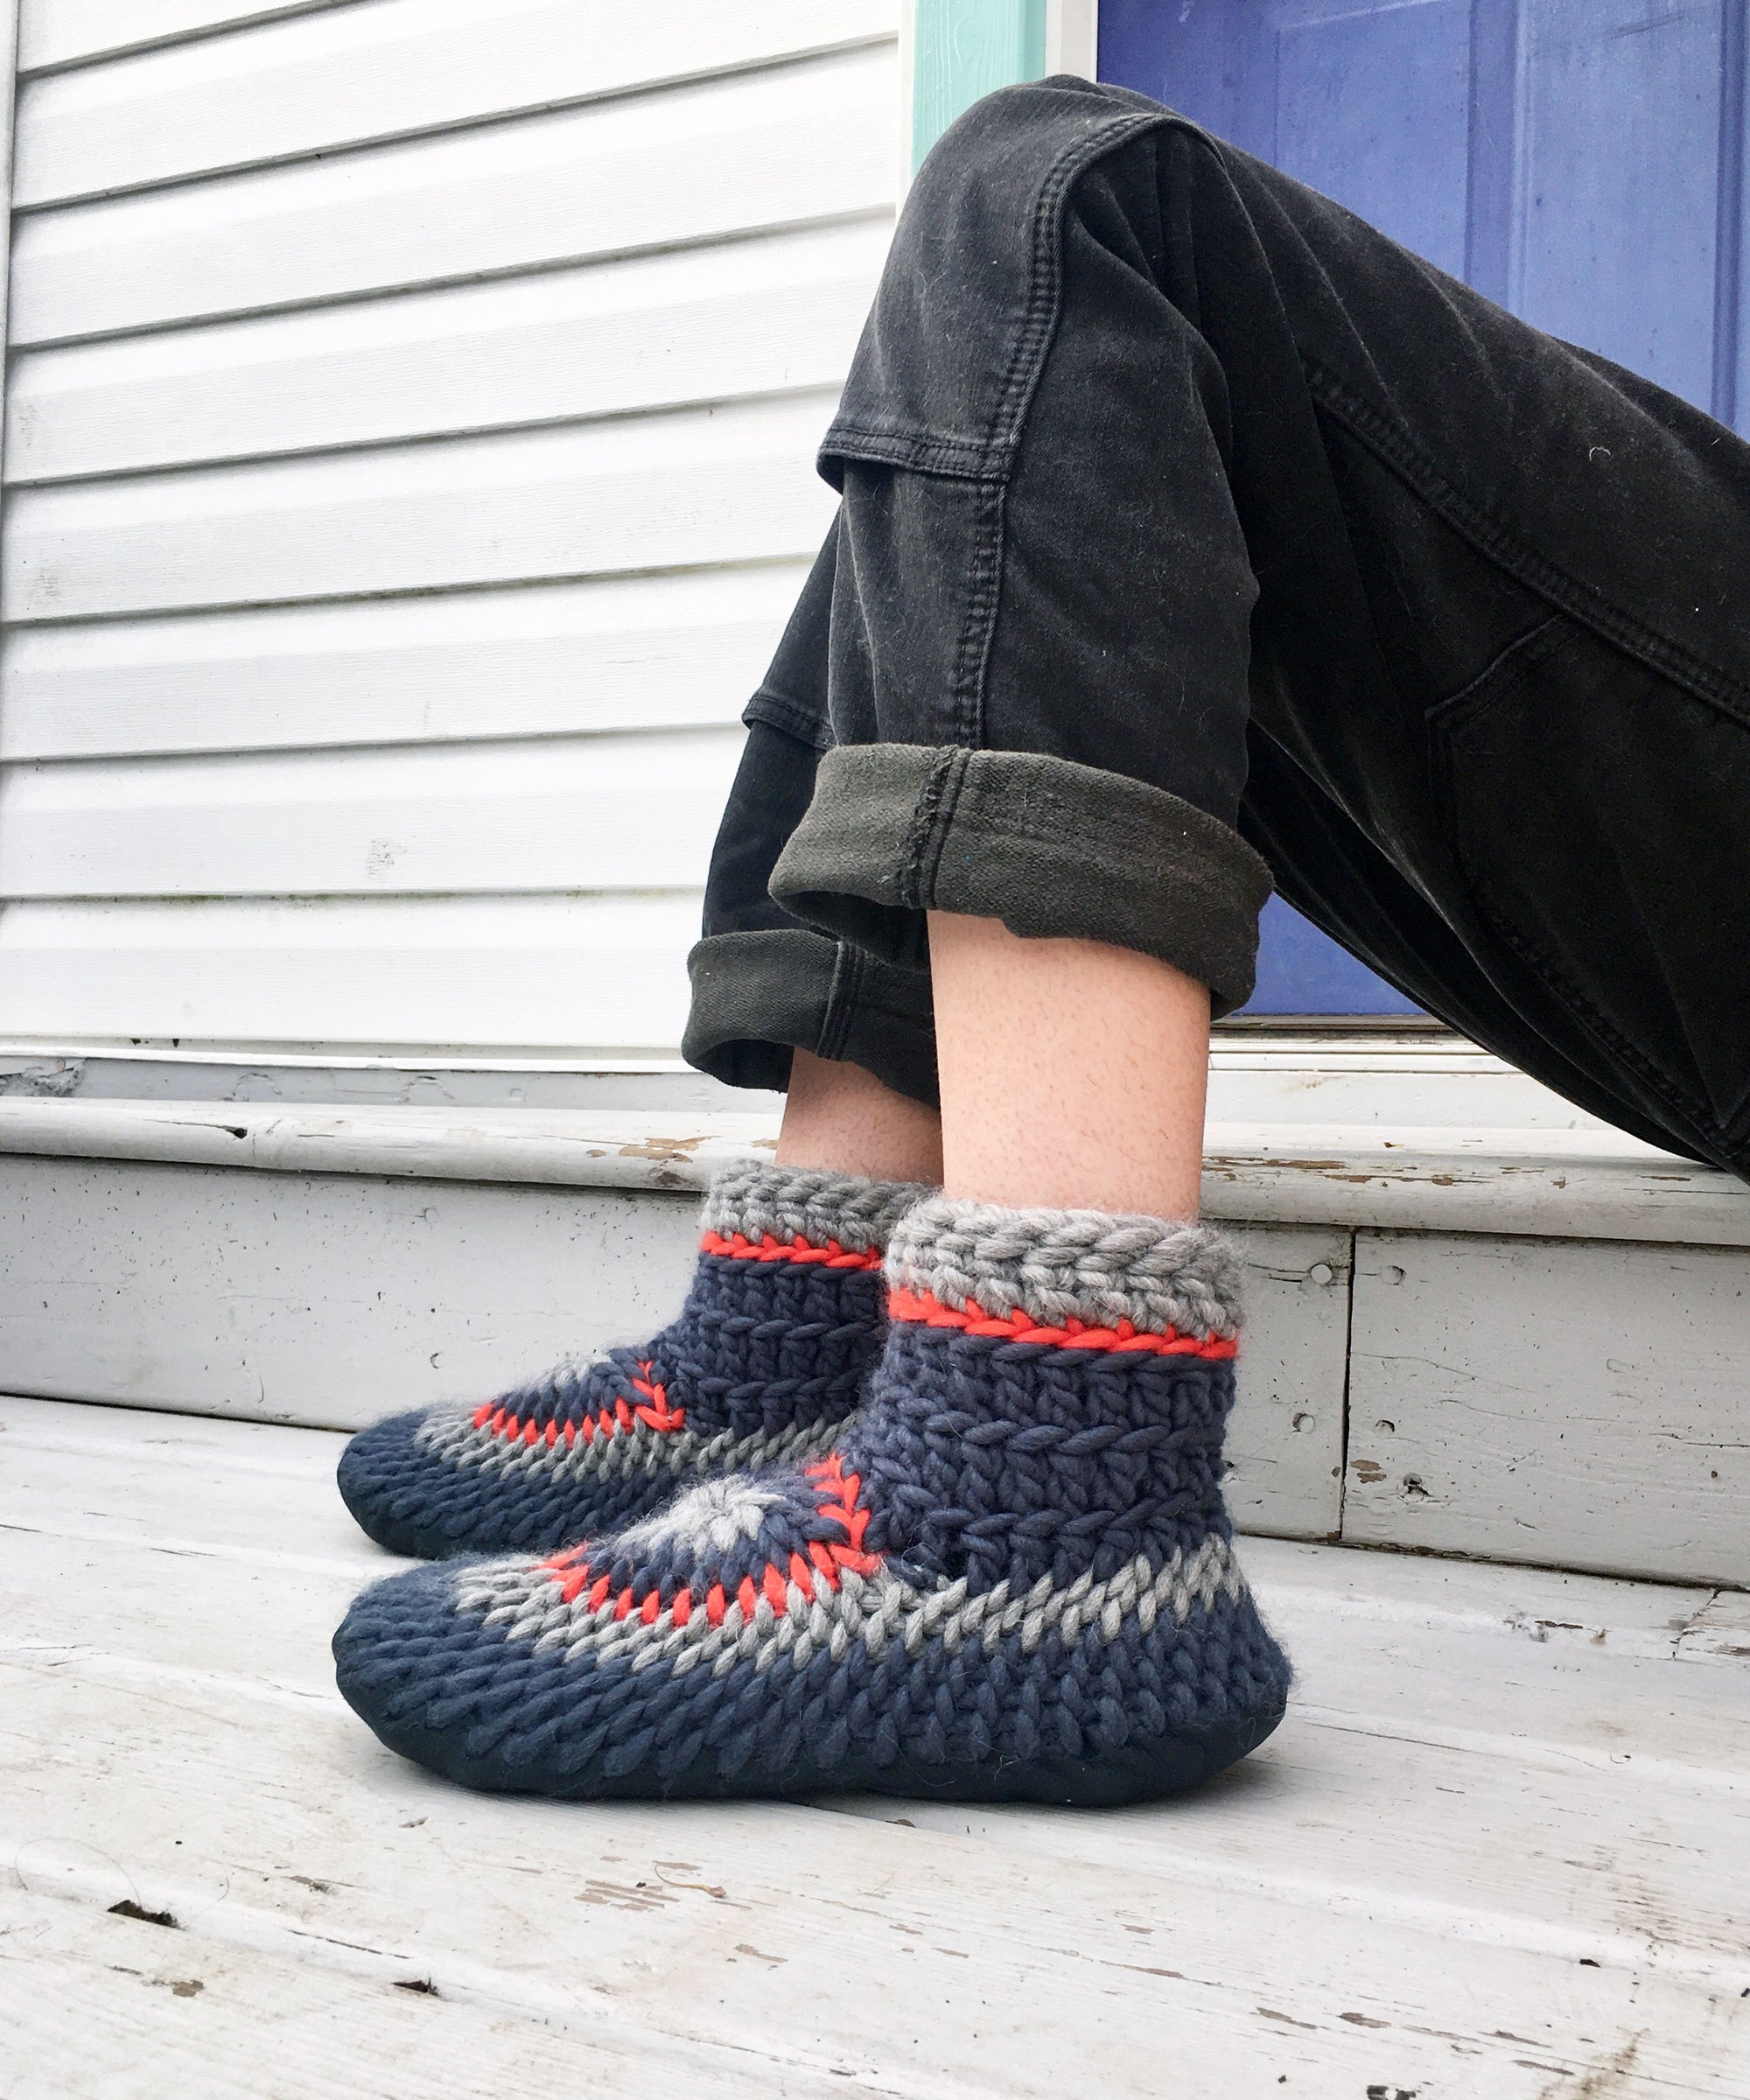 men's knitted merino wool slippers in blue and red, made in canada ecofriendly